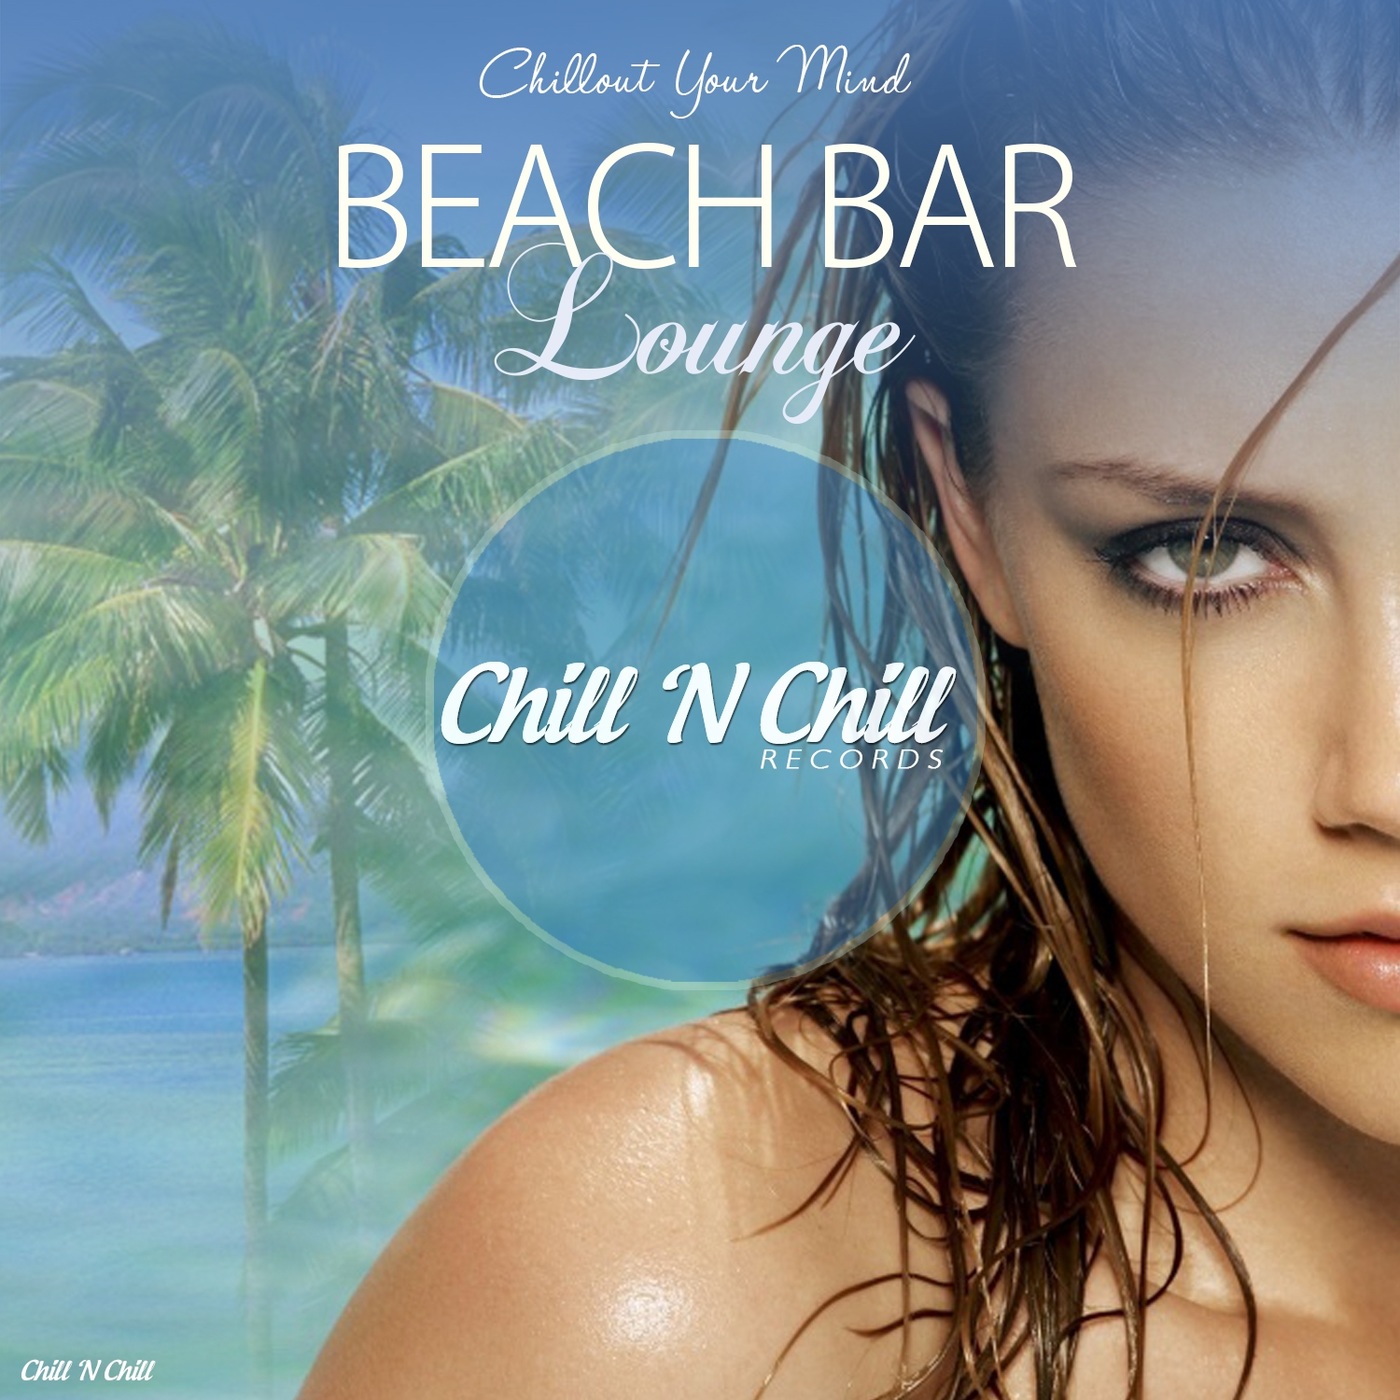 chill n chill records《beach bar lounge：chillout your mind 2019》